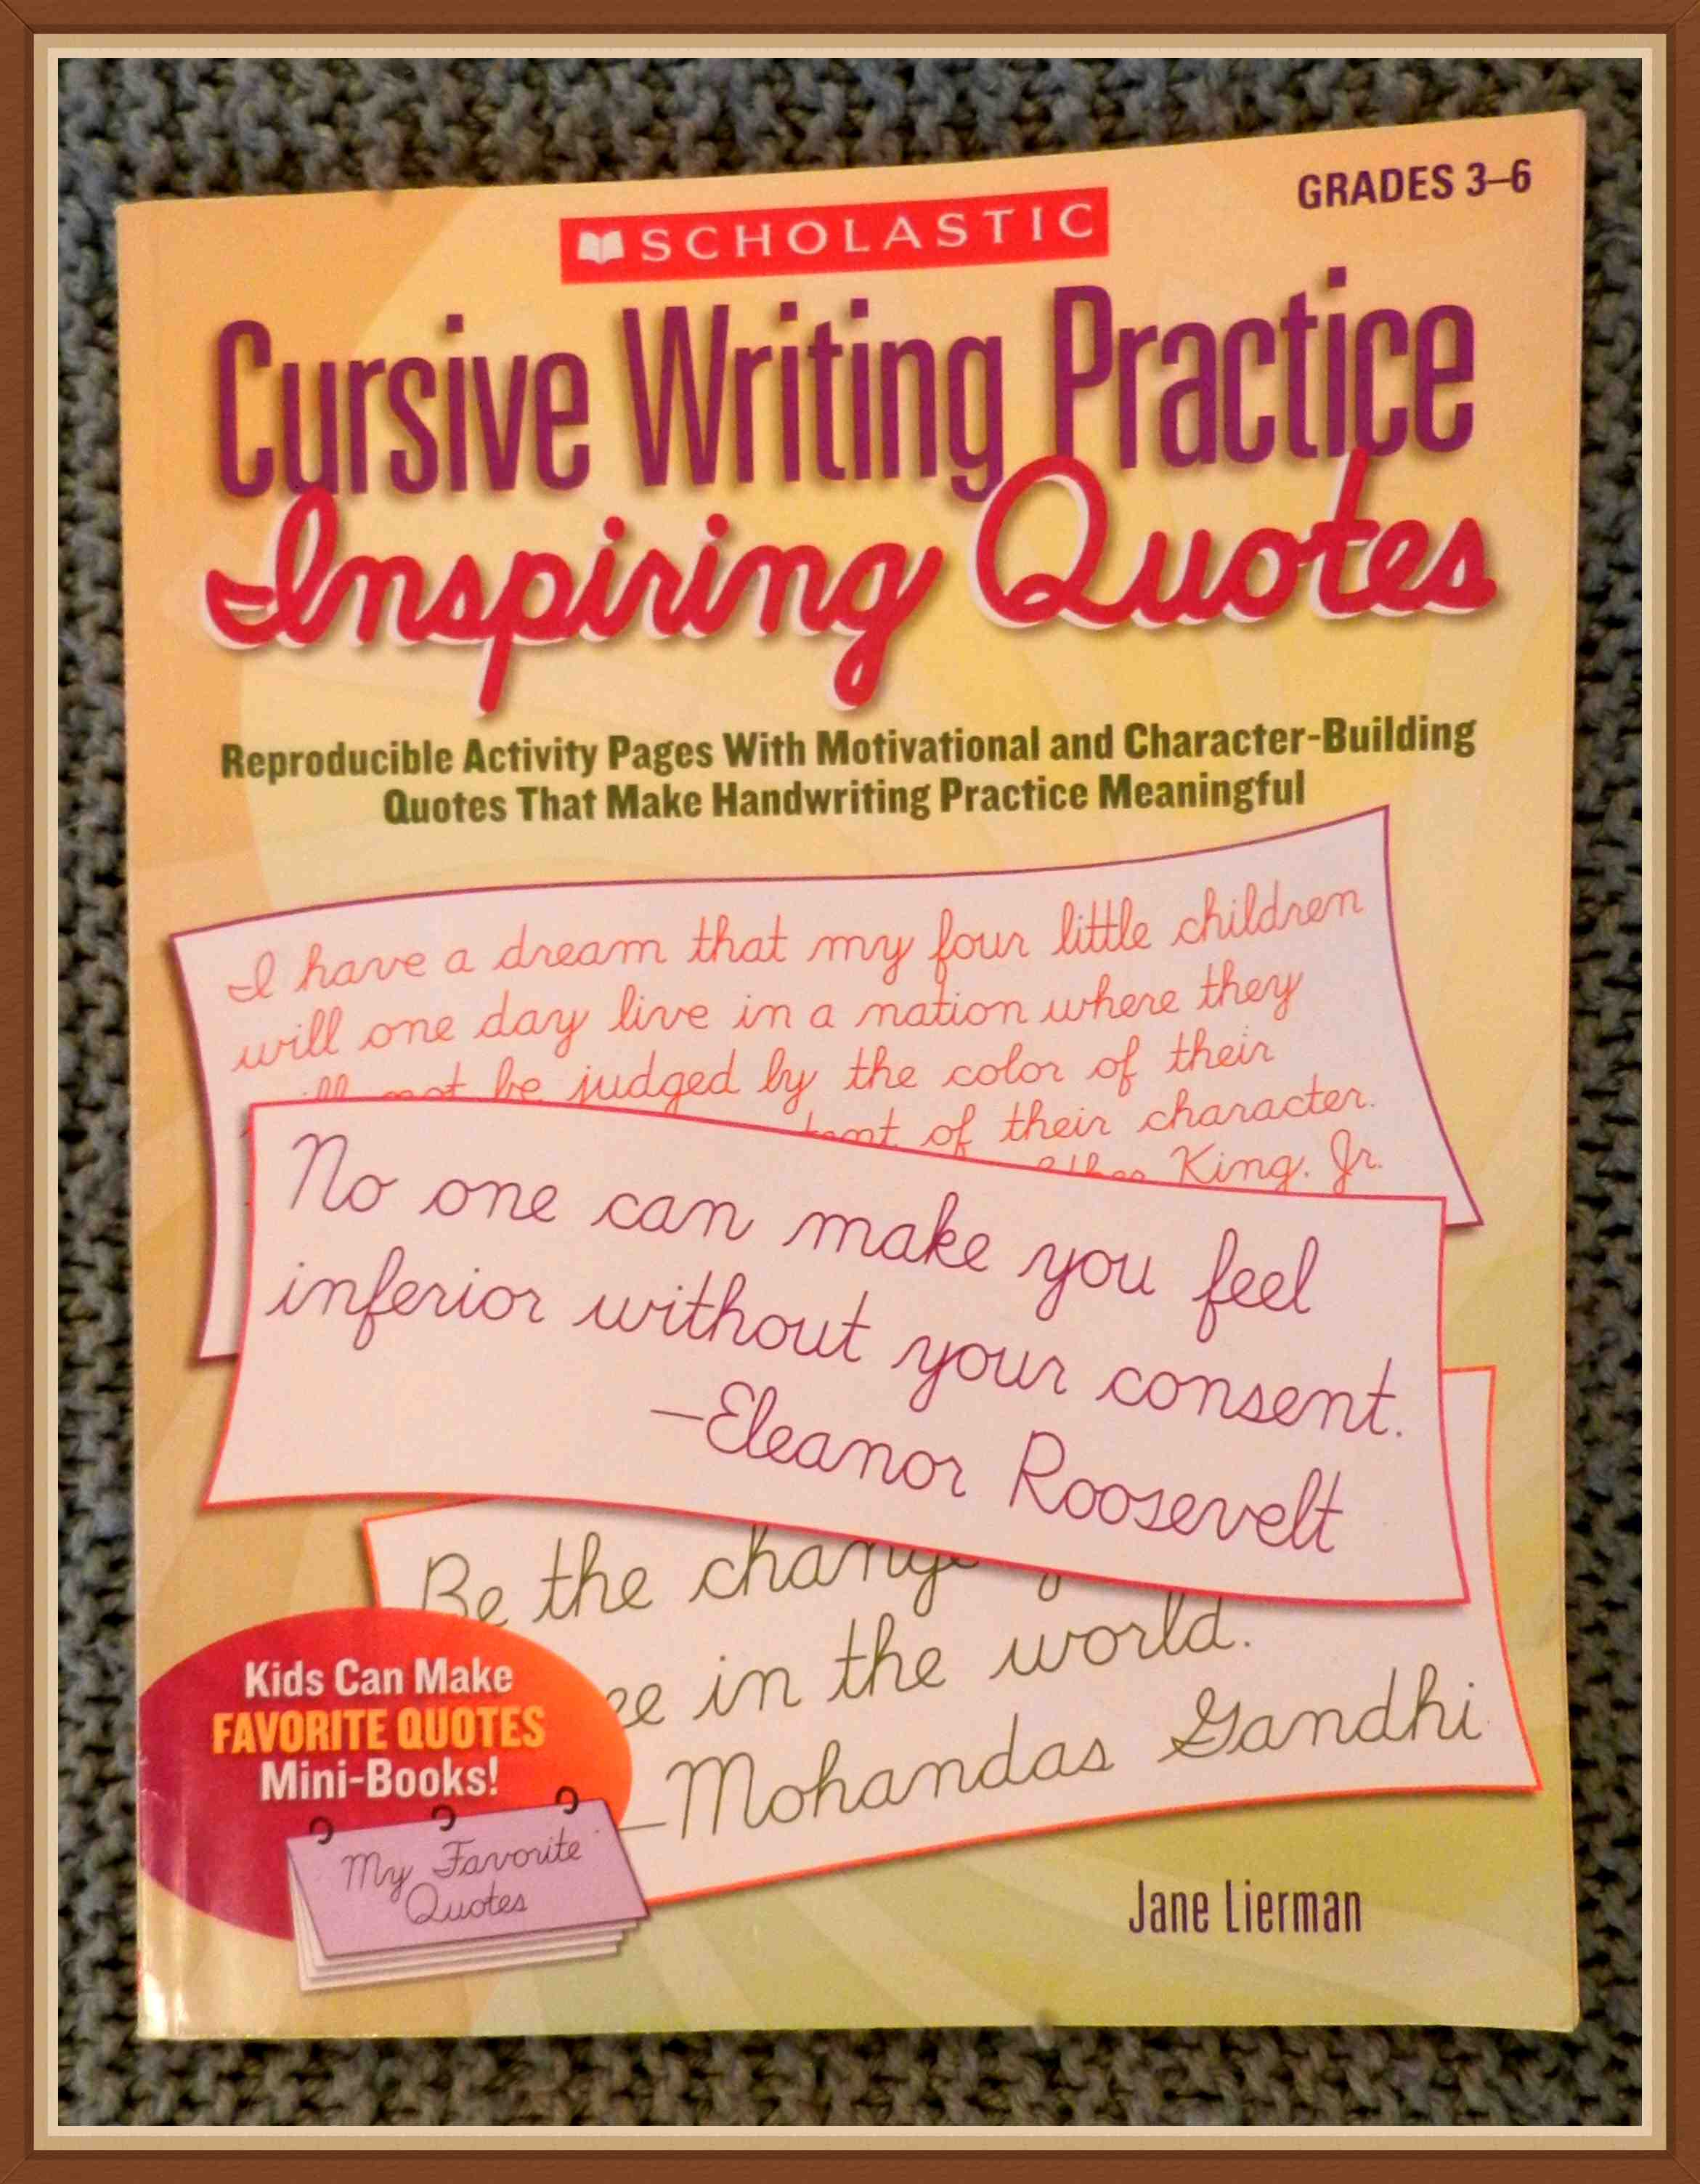 Inspiring Quotes – Cursive Writing Practice – My Review